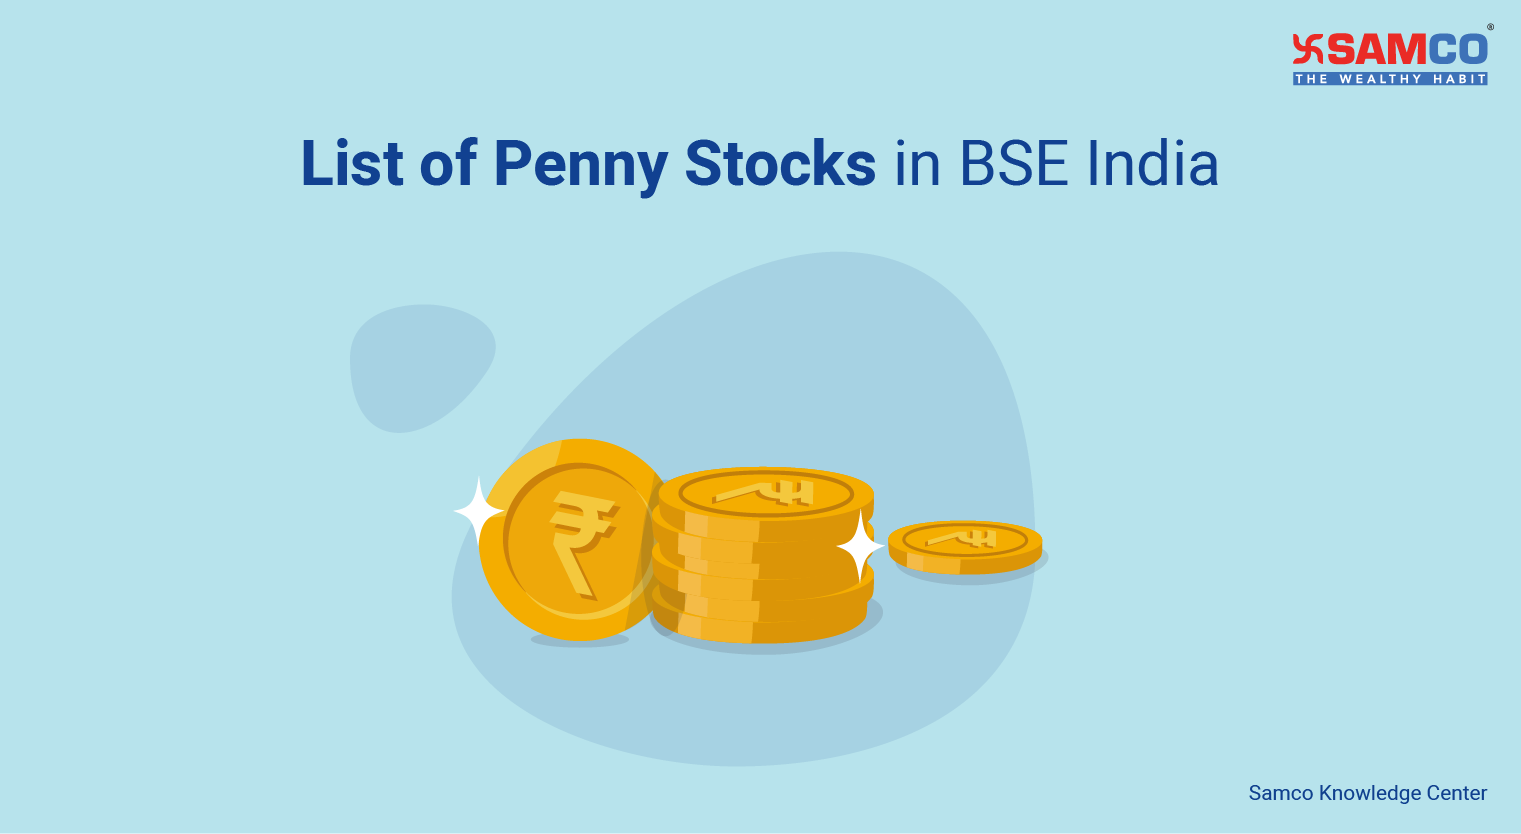 List of Penny Stocks in BSE India